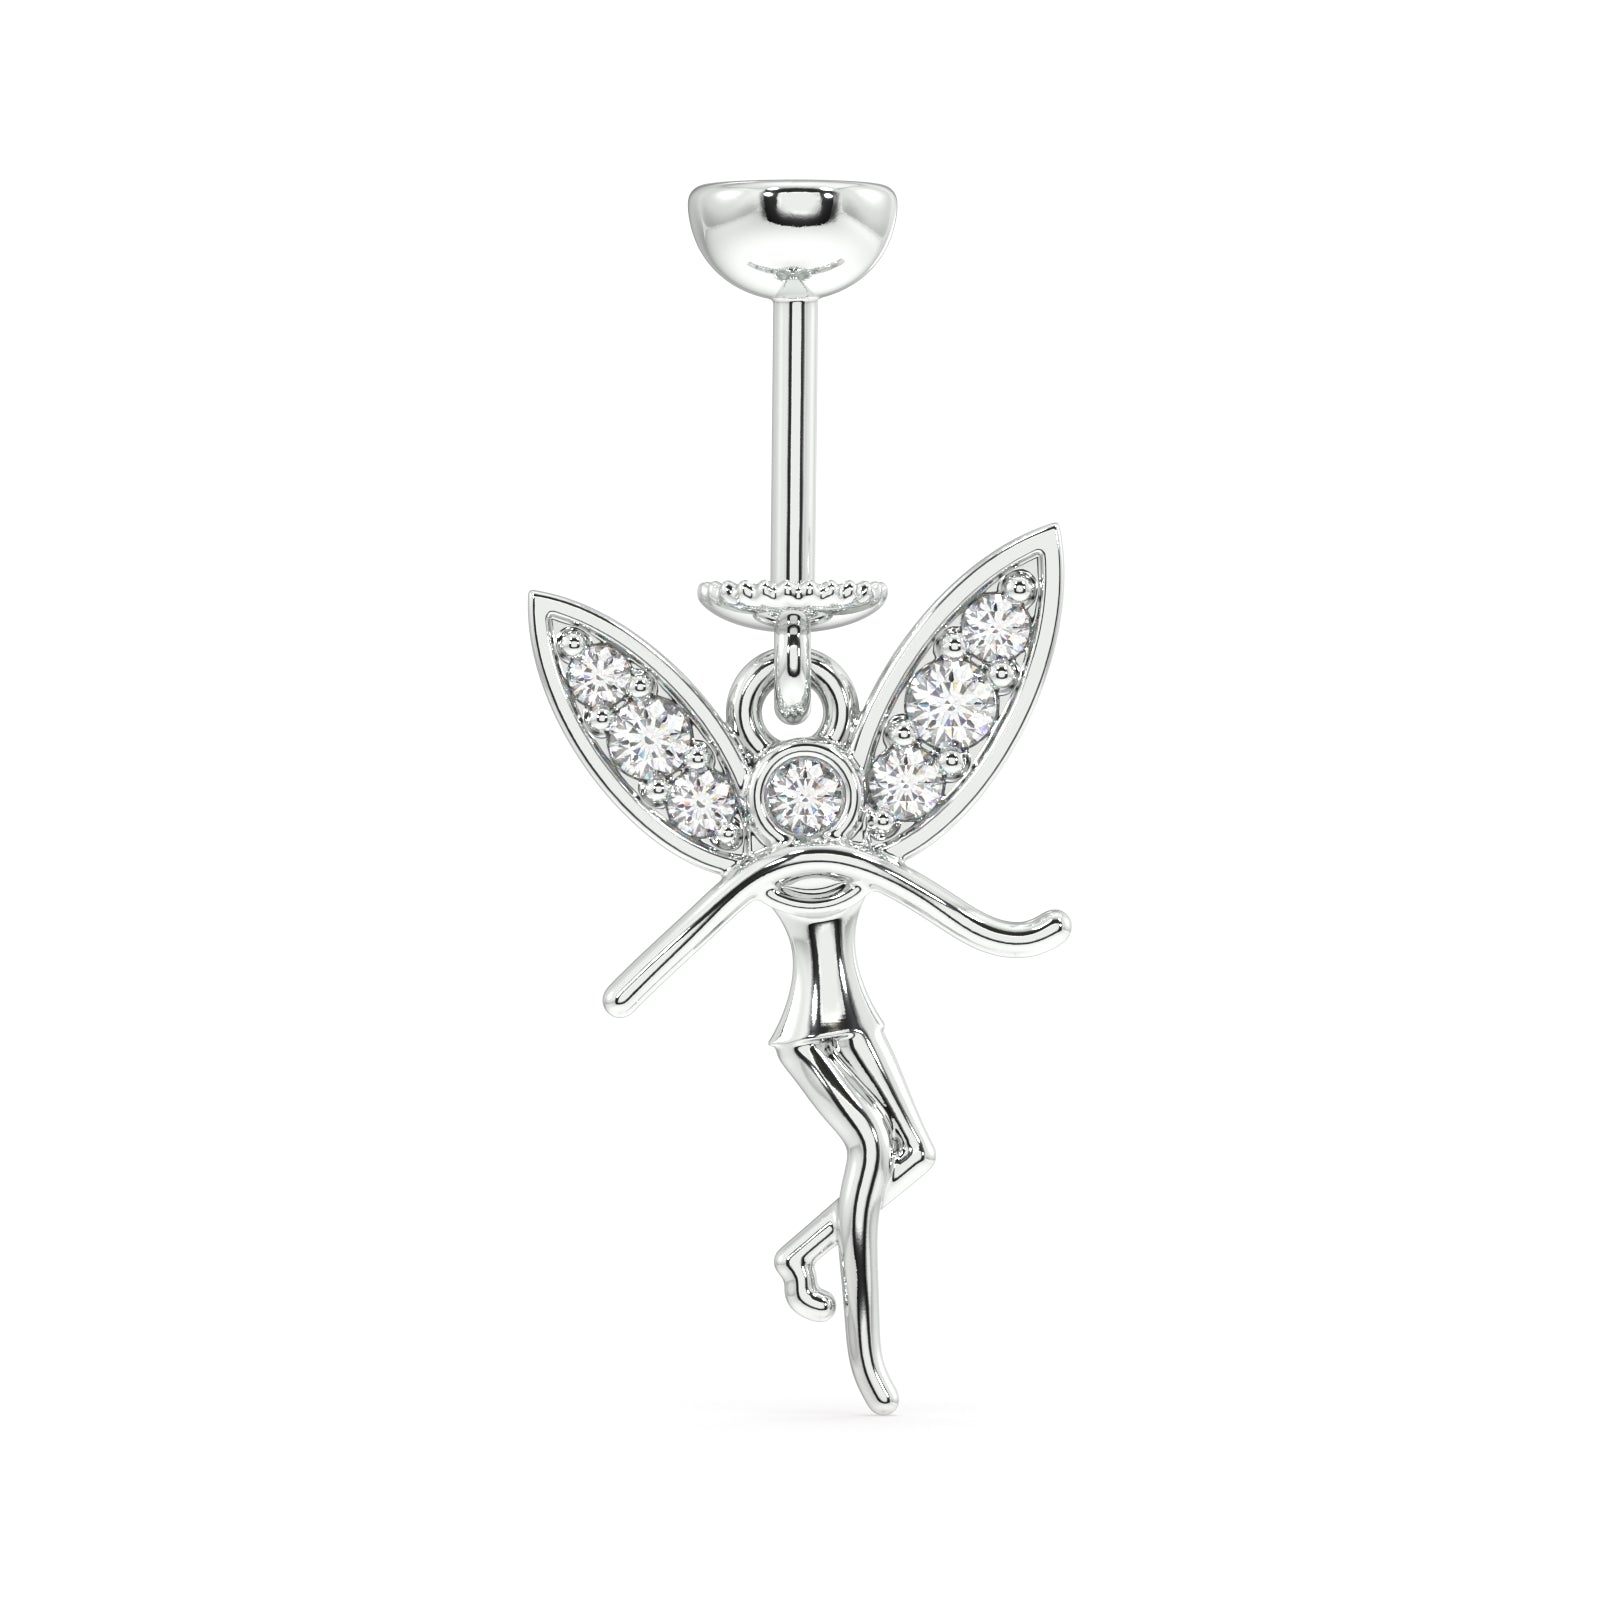 The flying angel - Screw Helix hanging